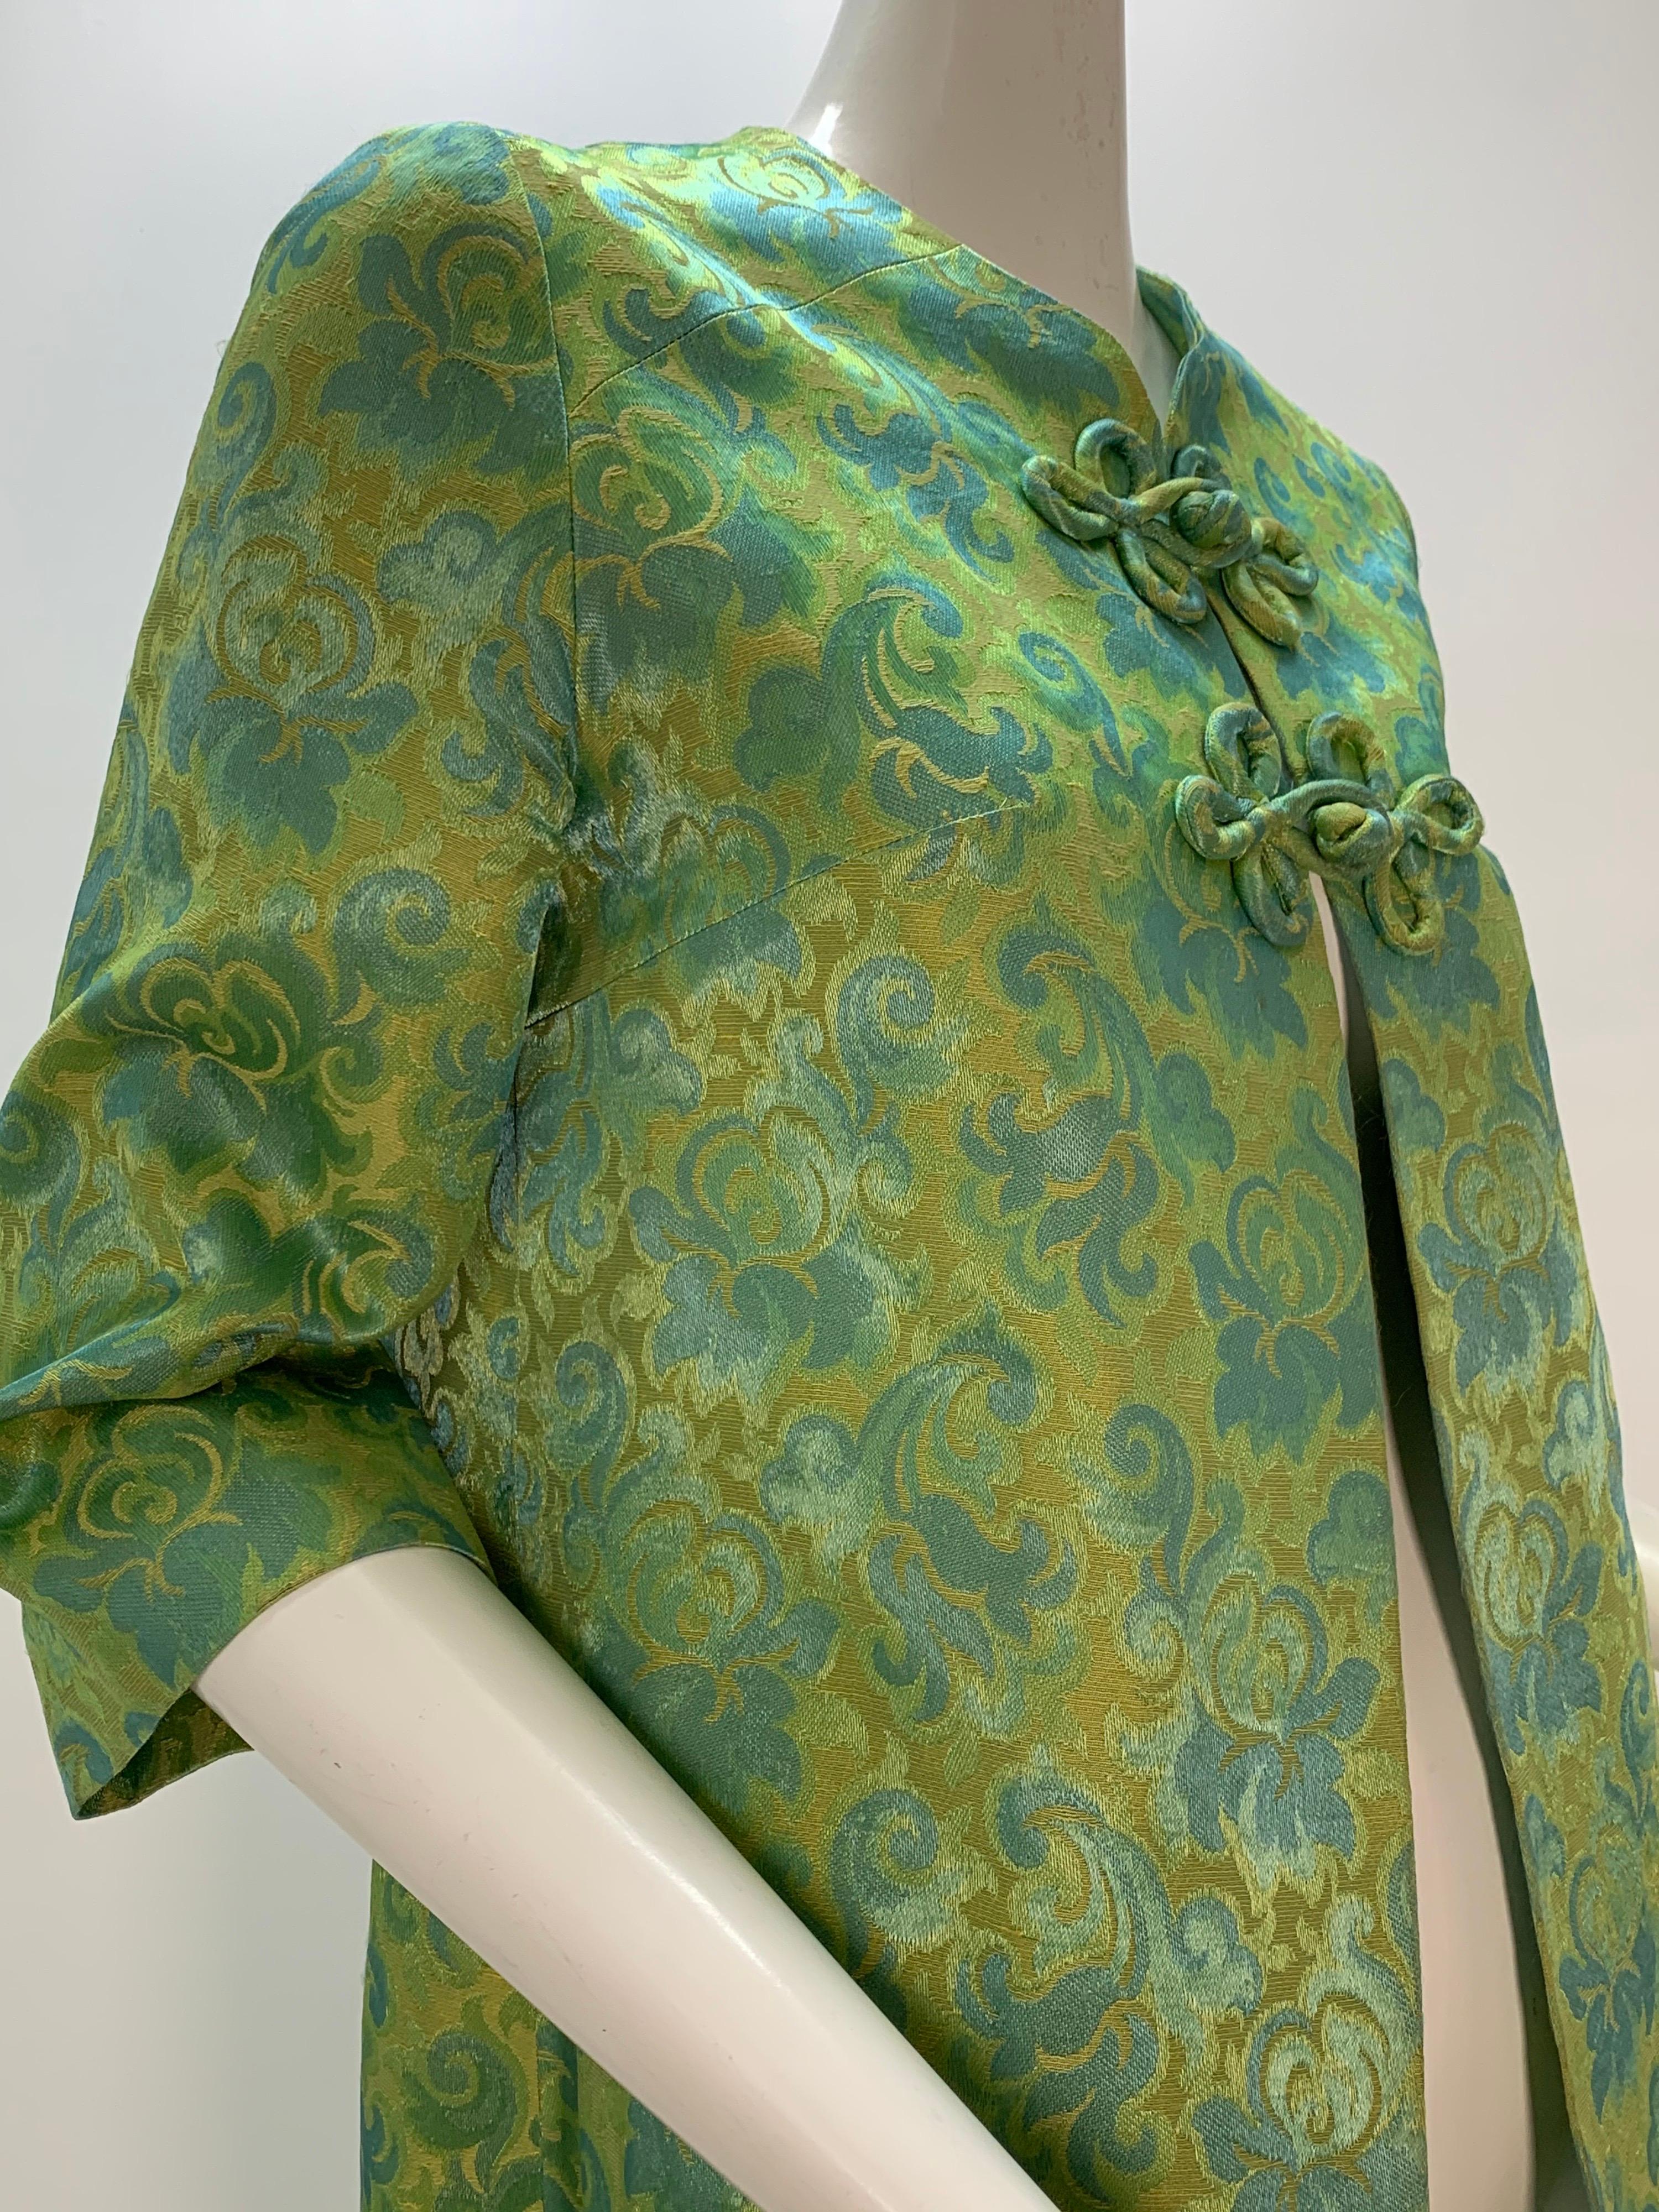 A 1960s green and aqua brocade jacket: Collarless Hong Kong-styled with 2 piped frog closures at neckline and 3/4 length sleeves. Lined. 